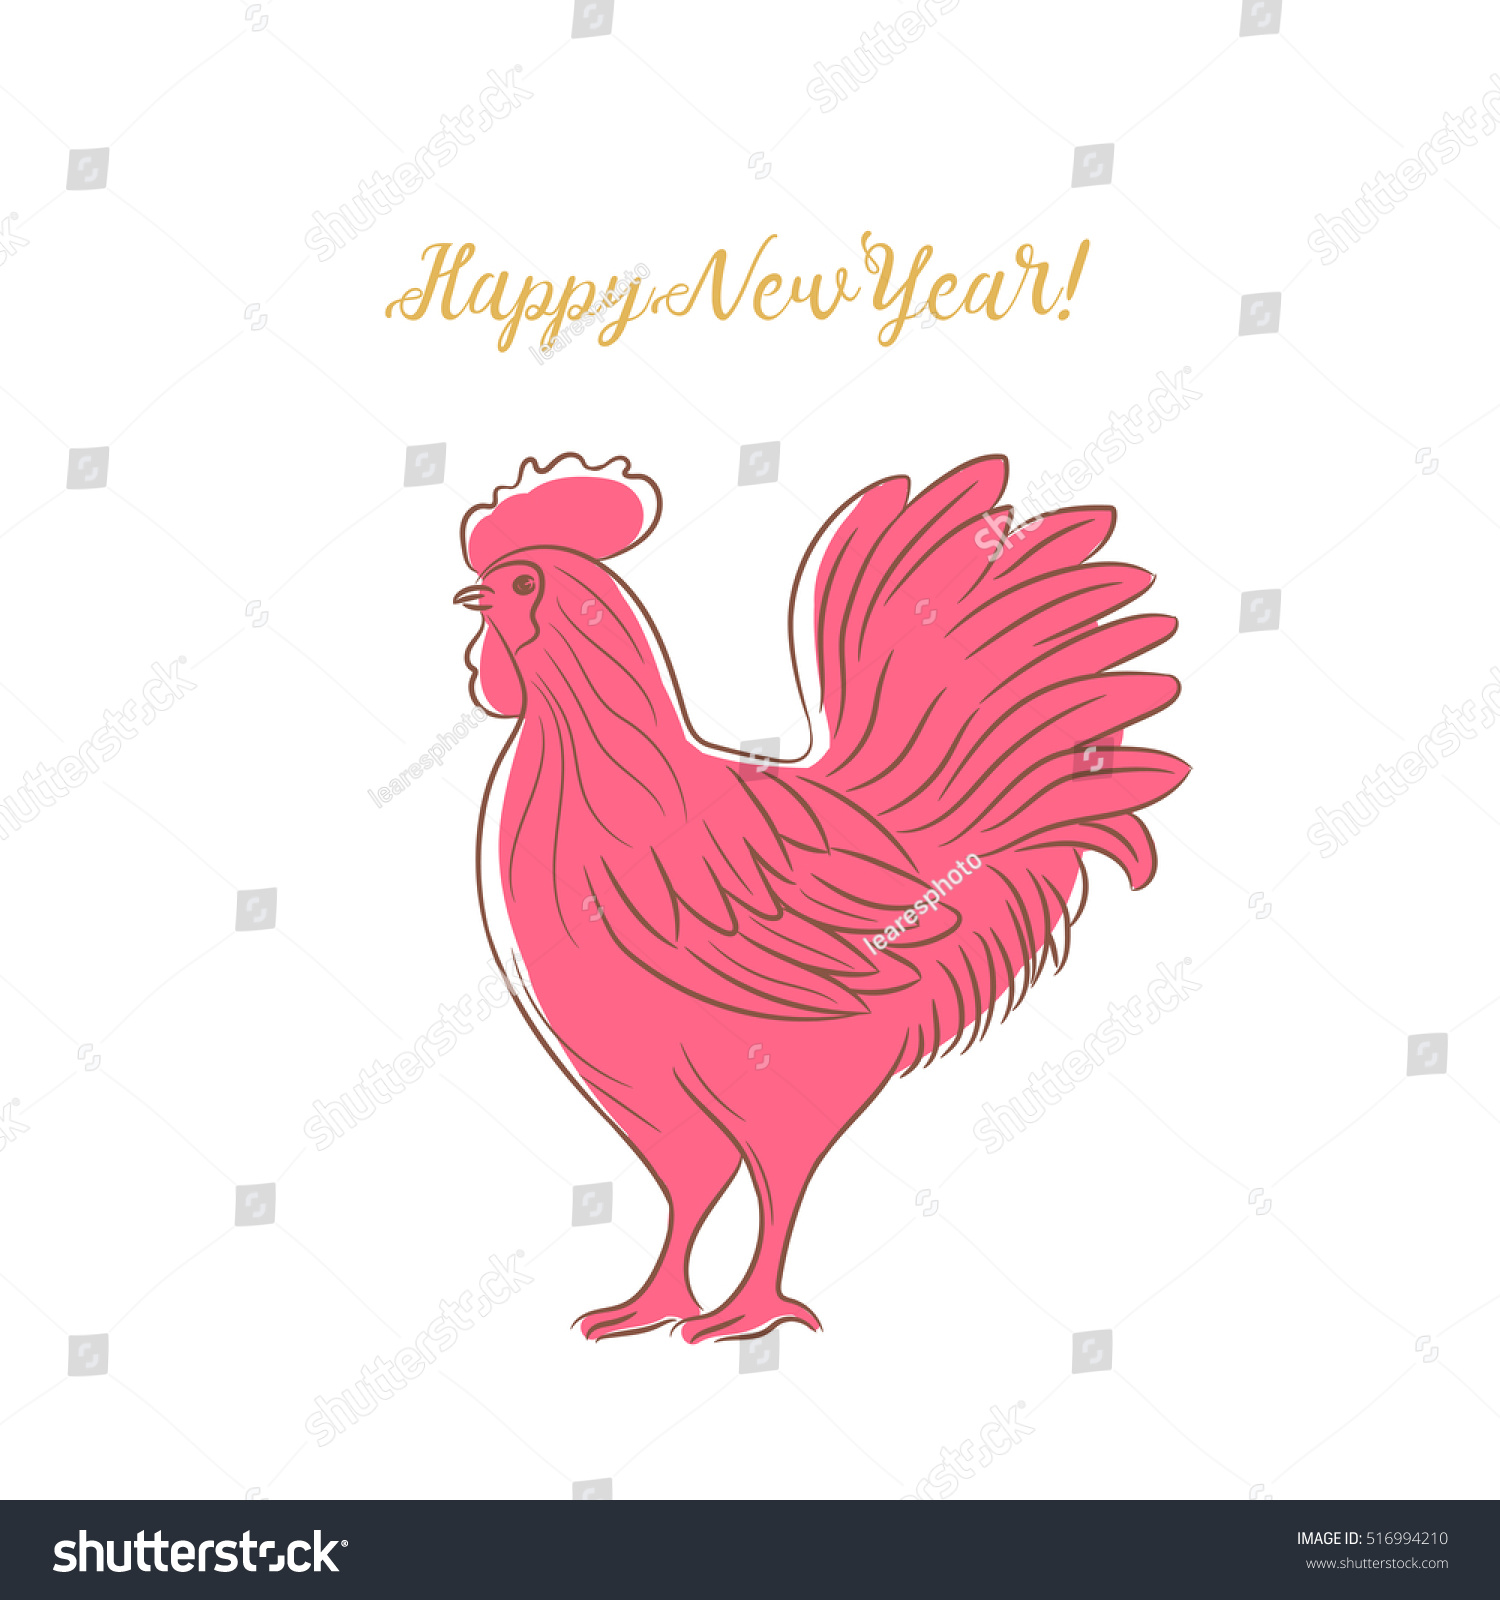 SVG of Drawing red rooster. Design Happy New Year greeting card. Cock, bantam, cock-a-doodle-doo illustration svg